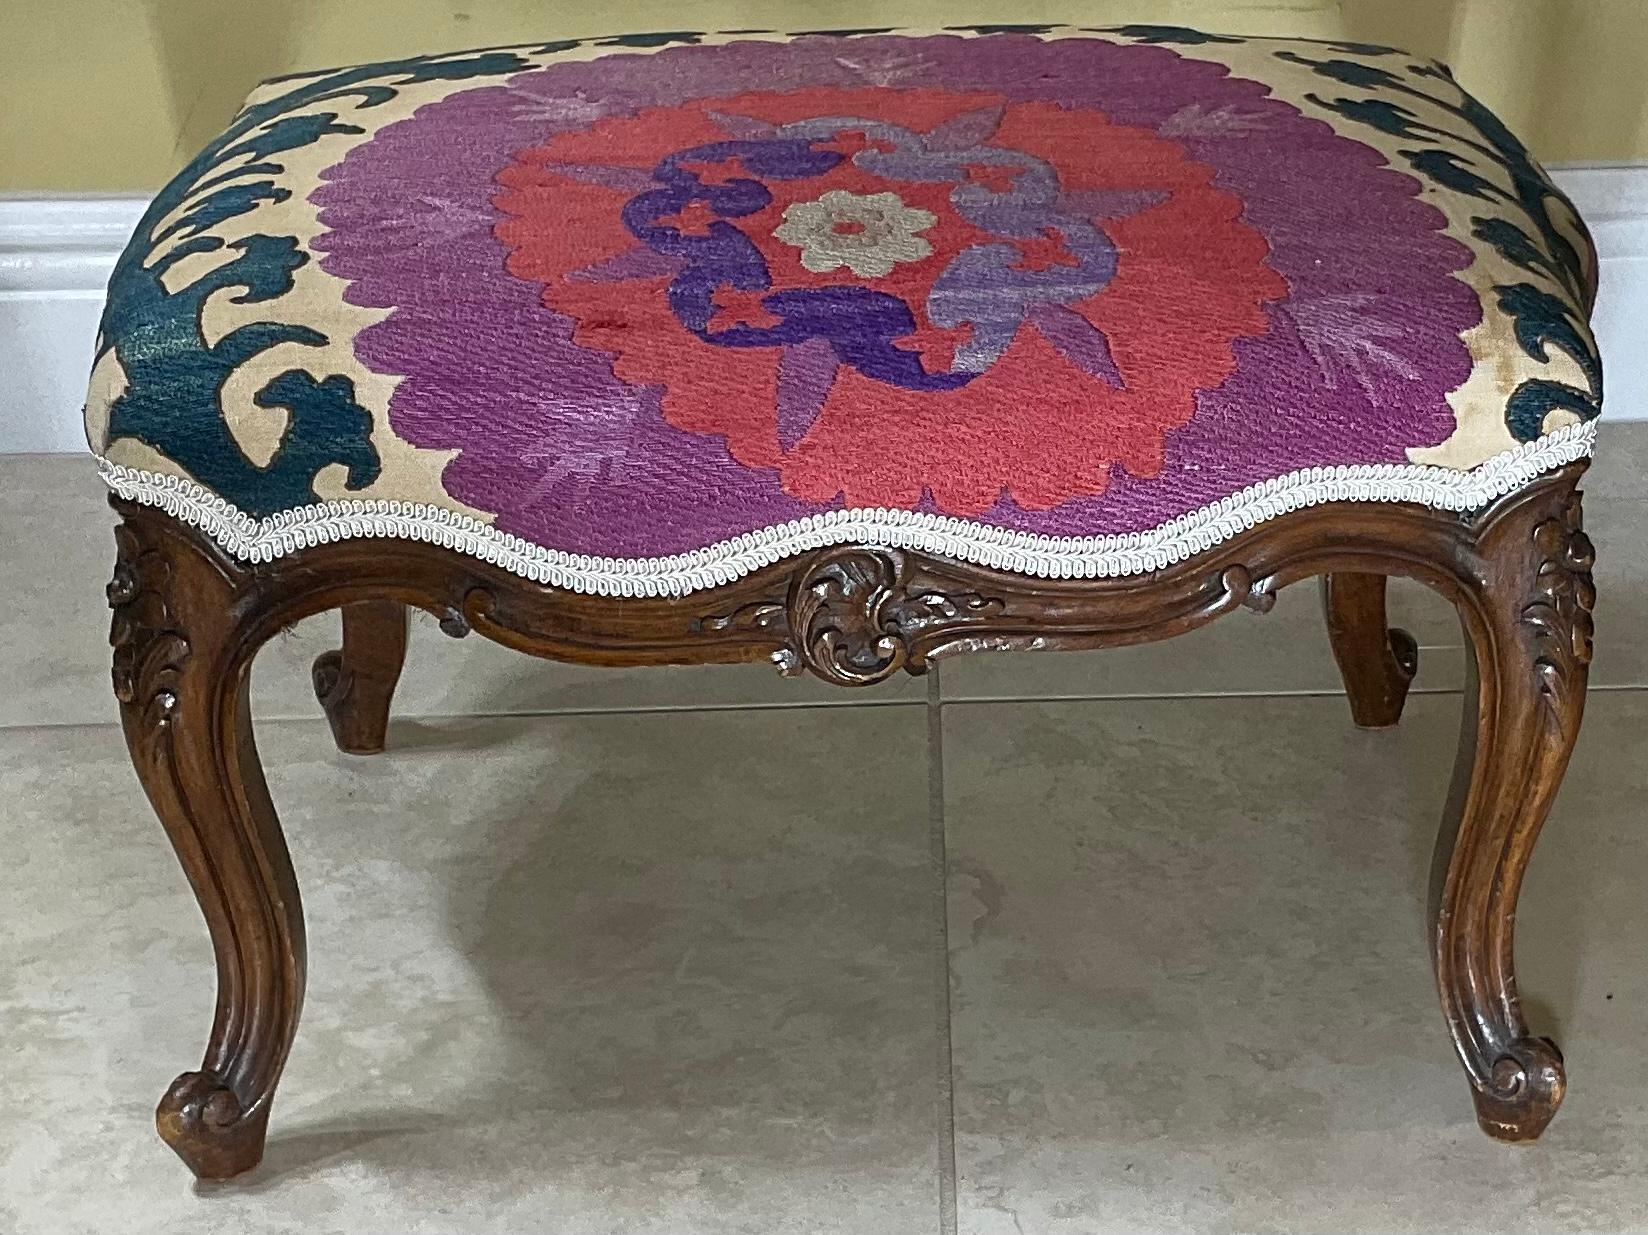 Elegant foot stool made of hand carved wood, upholstered with beautiful antique hand embroidery Suzani textile, beautiful trimming. Newly upholstered, some professionally textile repair see photos, great decorative foot stool.
     